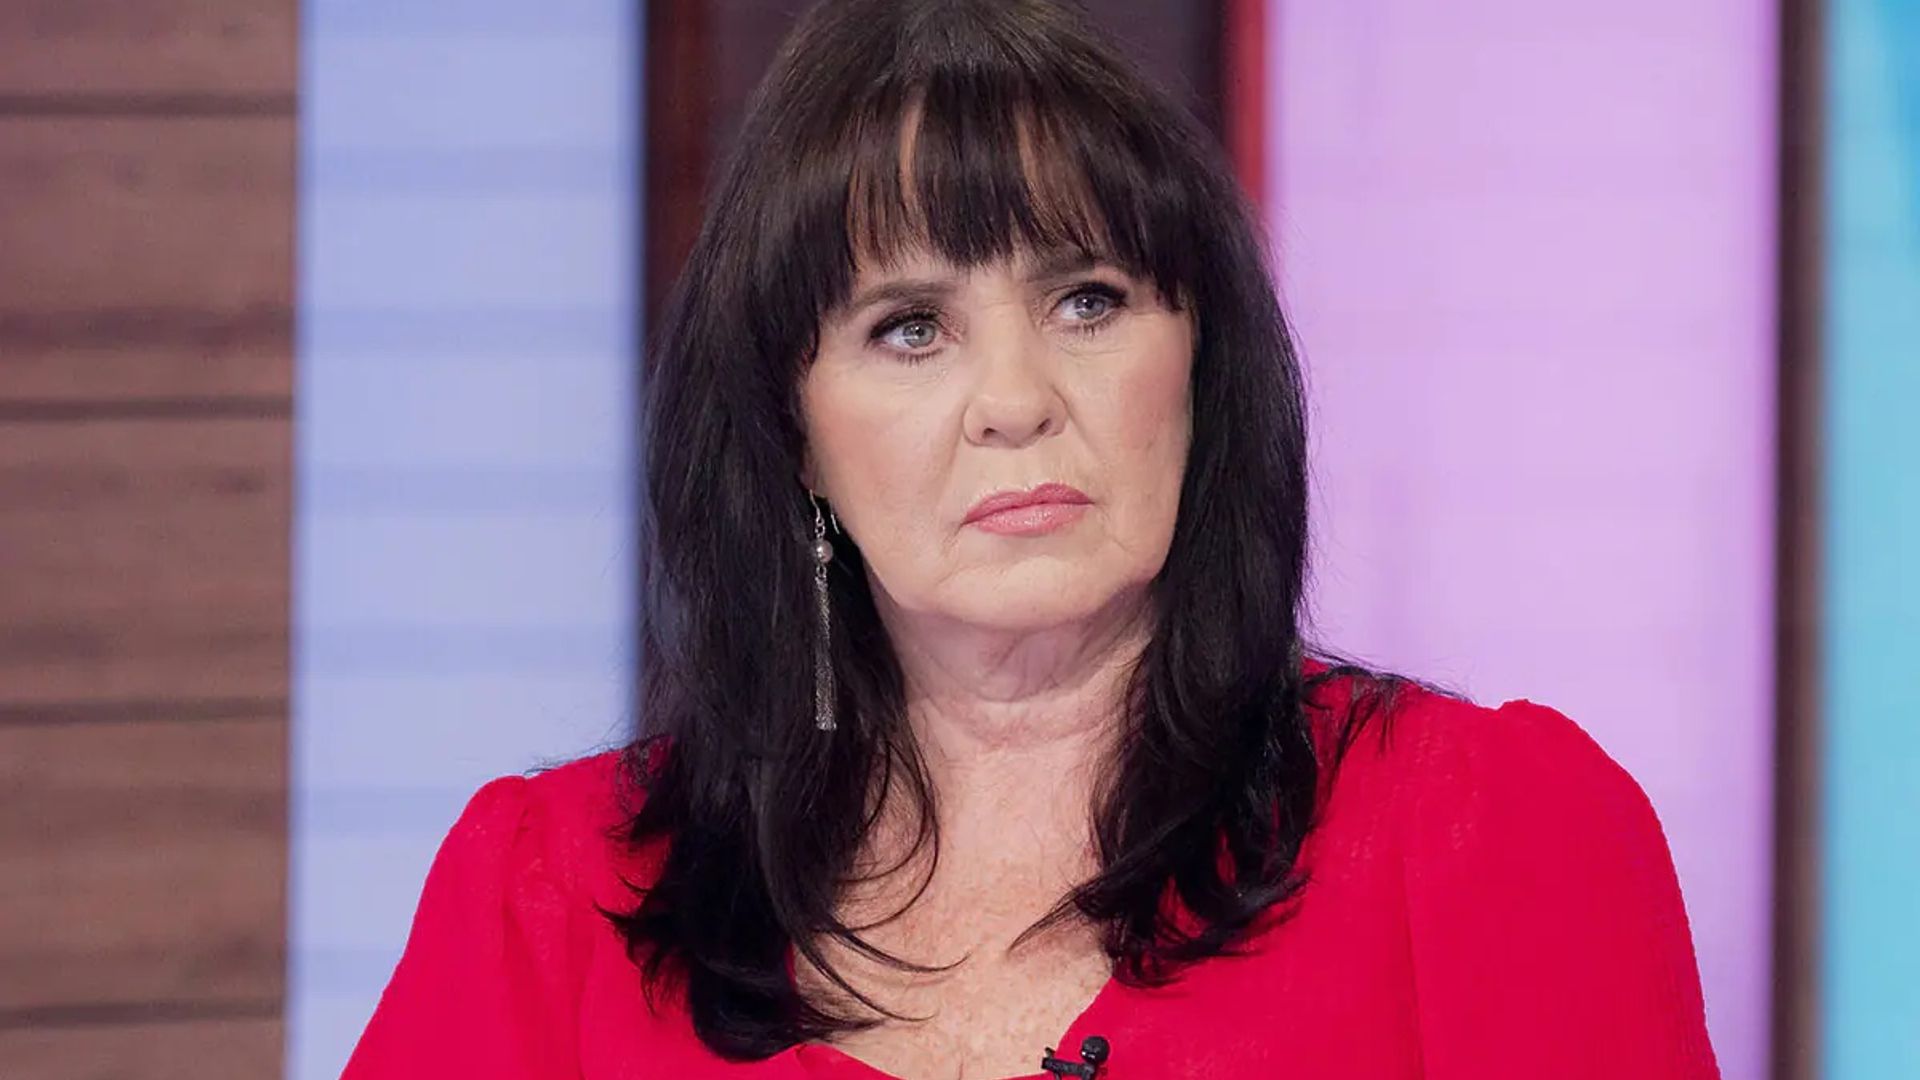 Loose Women's Coleen Nolan reveals she is 'dying of nerves' before going on the show